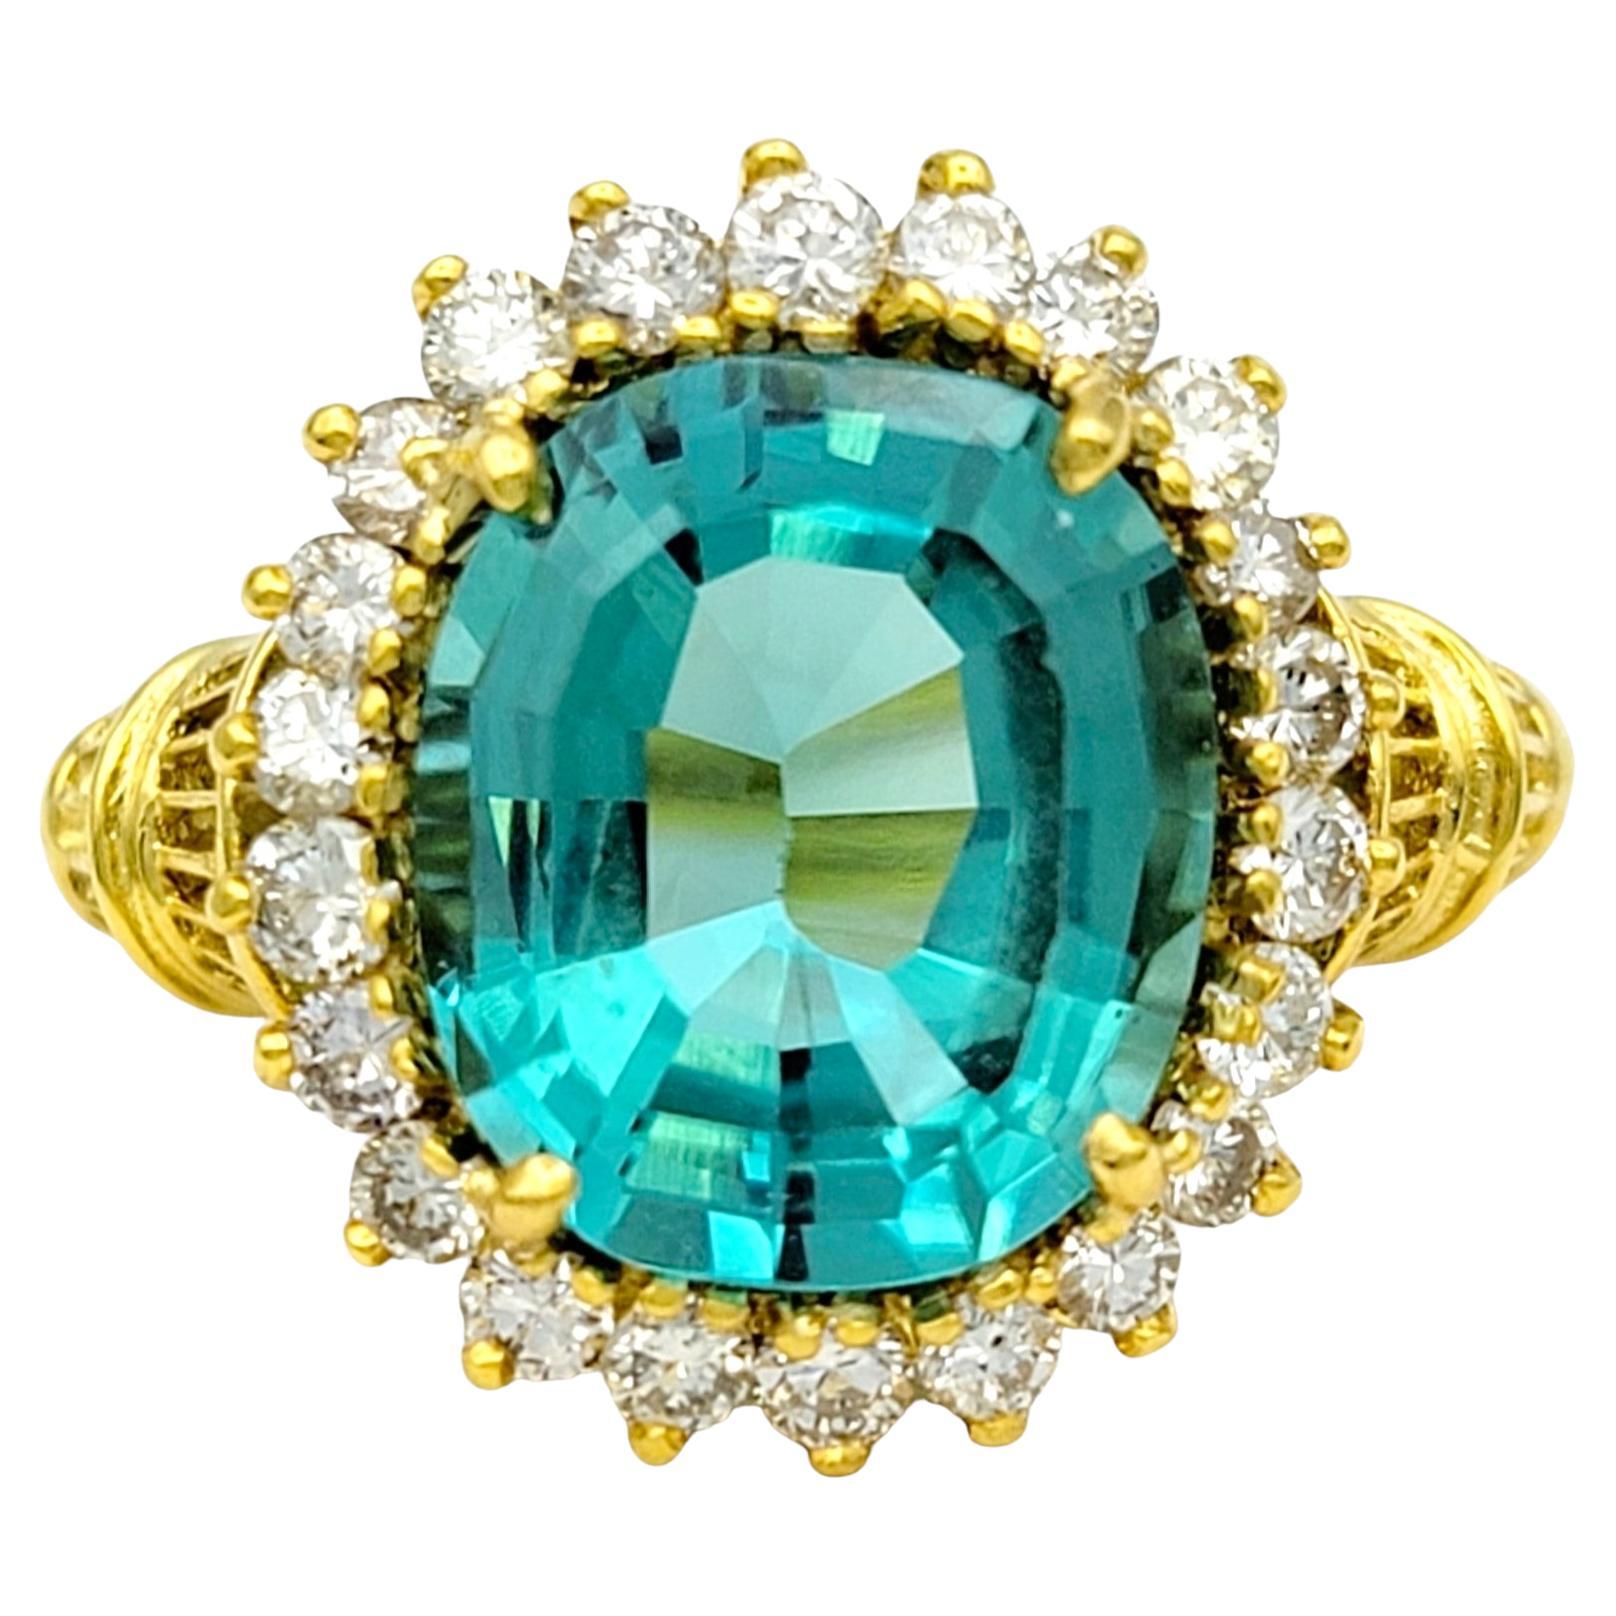 Rare 3.0 Carat Oval Cut Indicolite Tourmaline Ring with Diamond Halo in 18K Gold For Sale